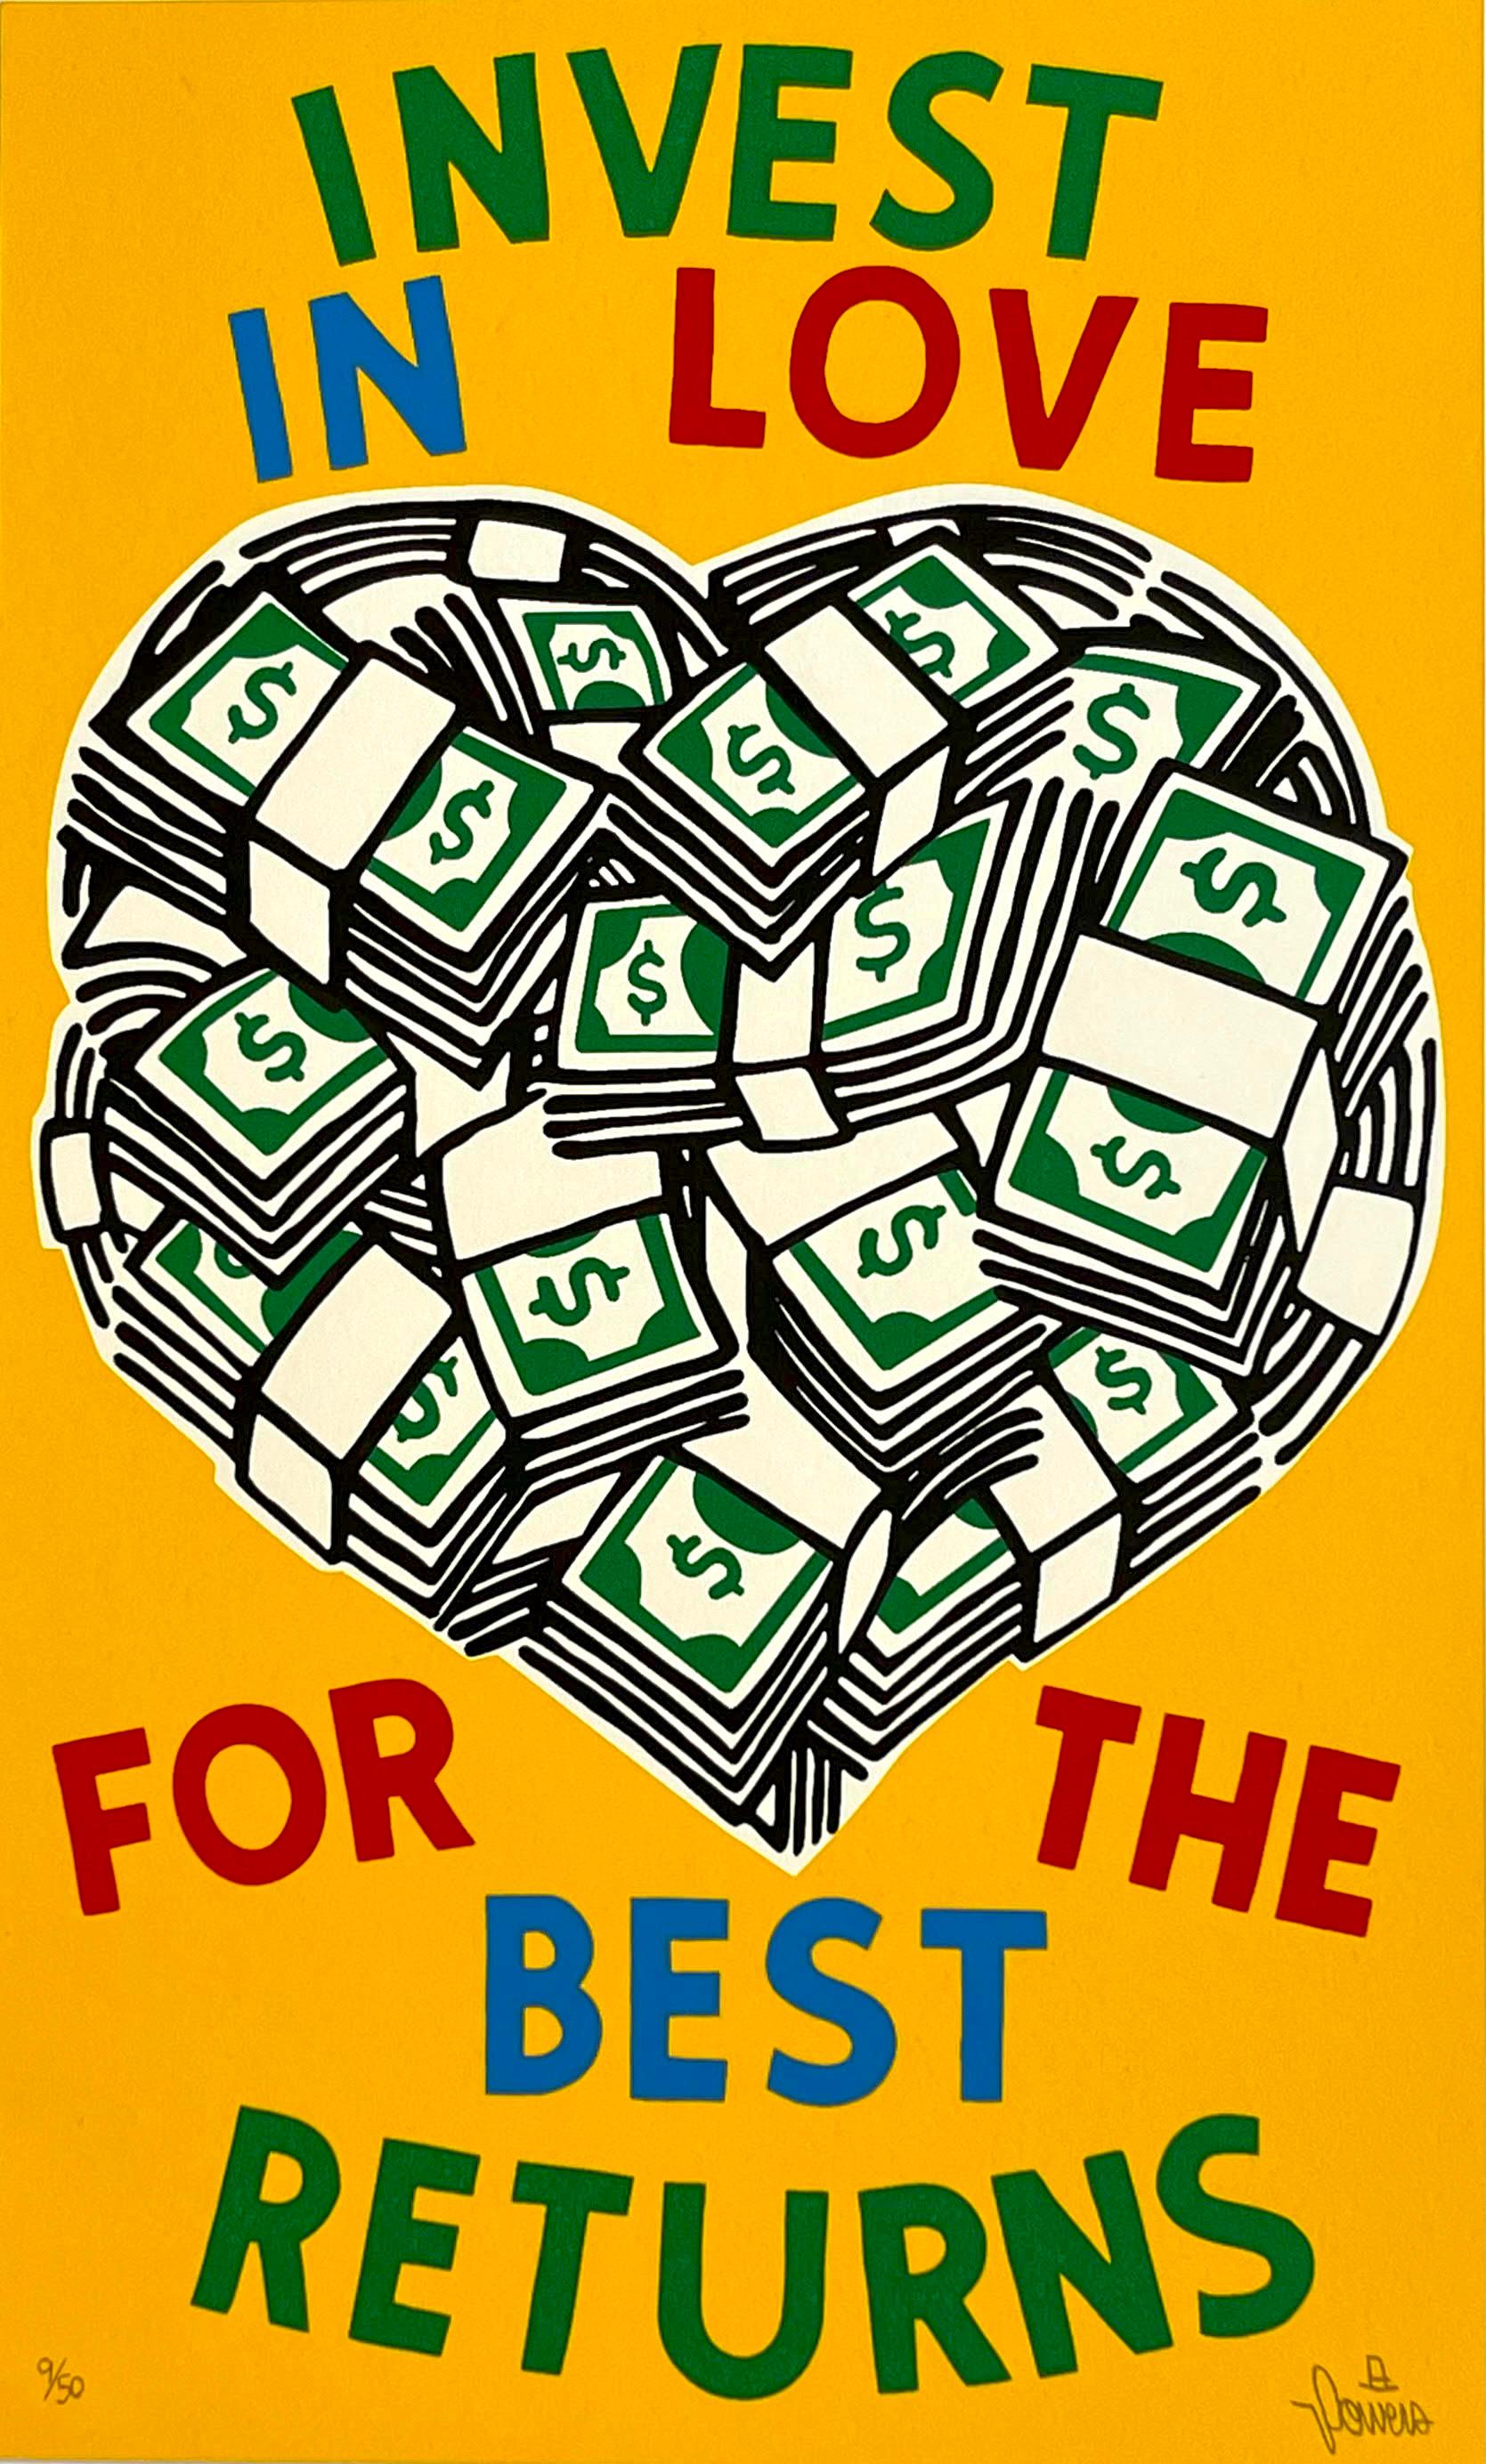 Stephen Powers Figurative Print - "Invest in Love" signed and numbered 9/50 Pop Art Street Art heart & money print